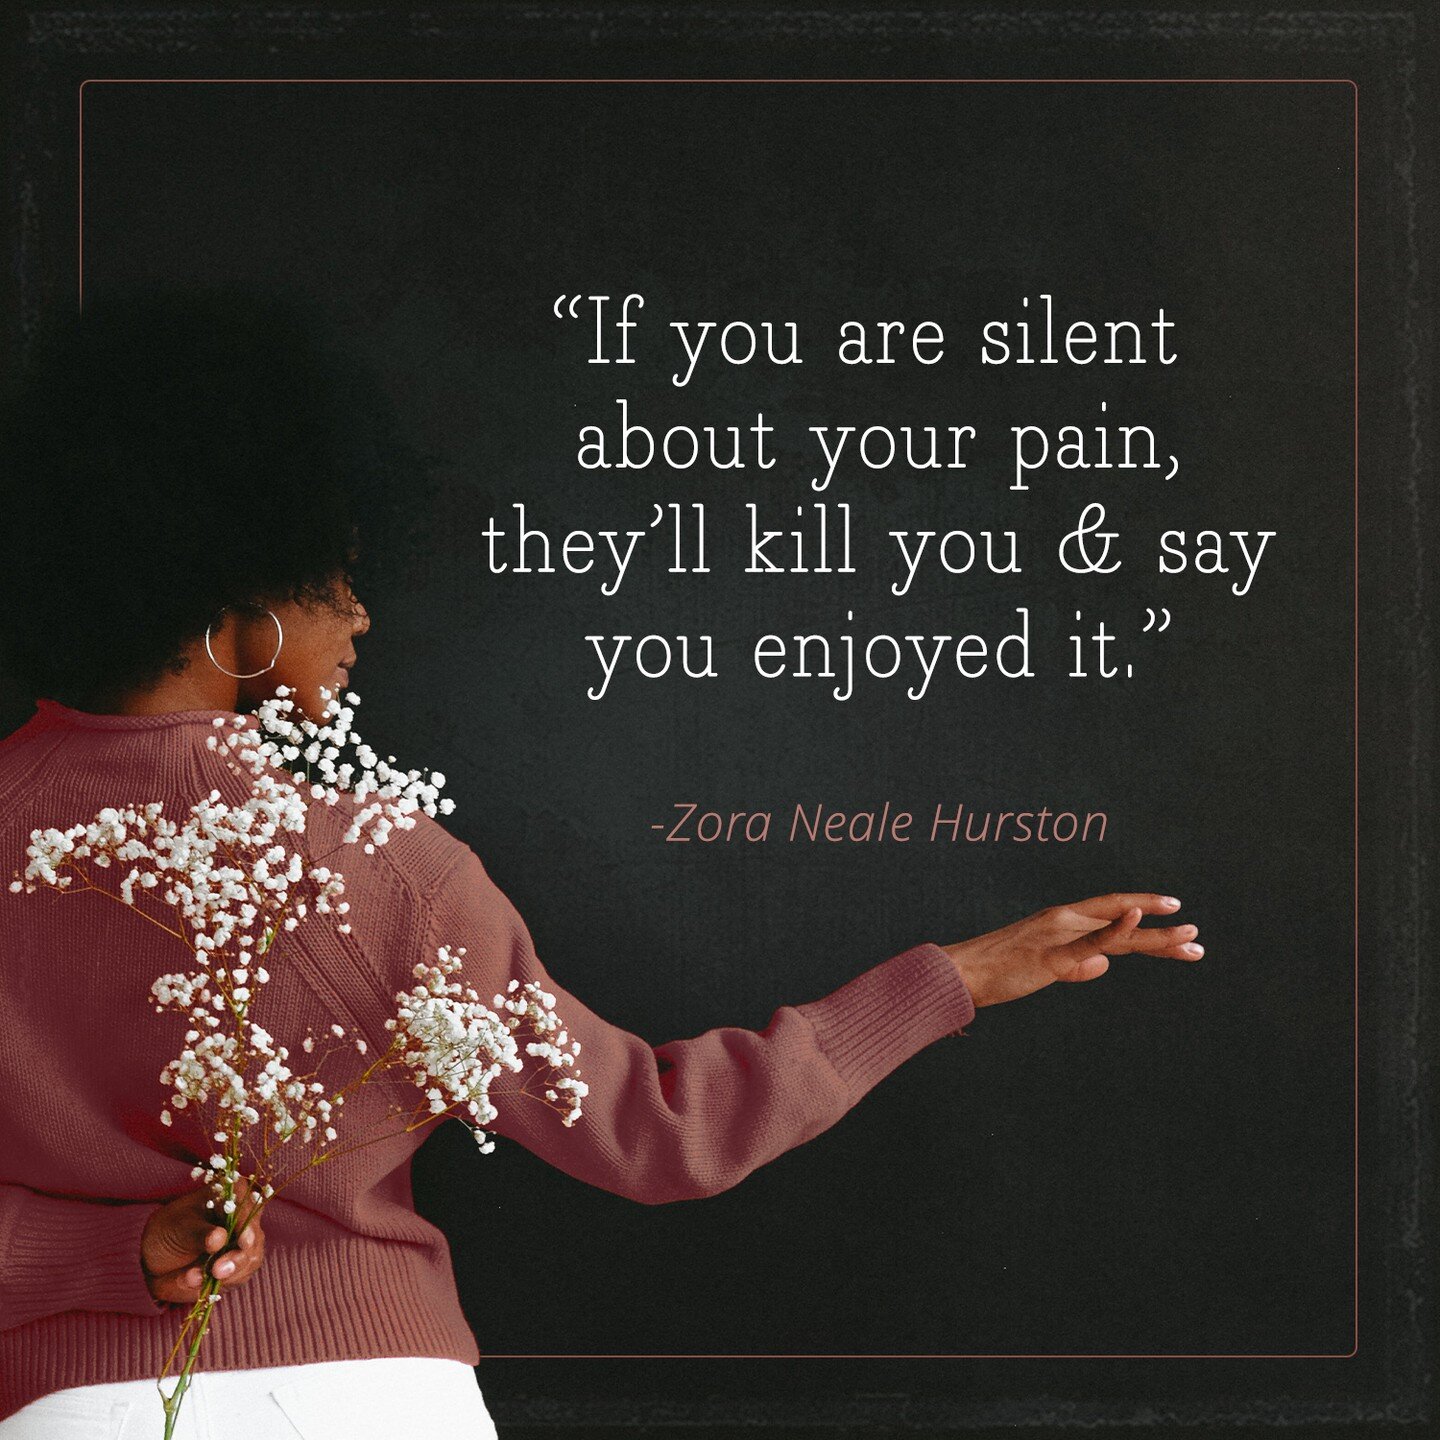 &ldquo;If you are silent about your pain,
they&rsquo;ll kill you &amp; say you enjoyed it.&rdquo;

-Zora Neale Hurston

#girlHidden #memoir #favoritequotes #tellyourstory #bookstagram #noranealehurston